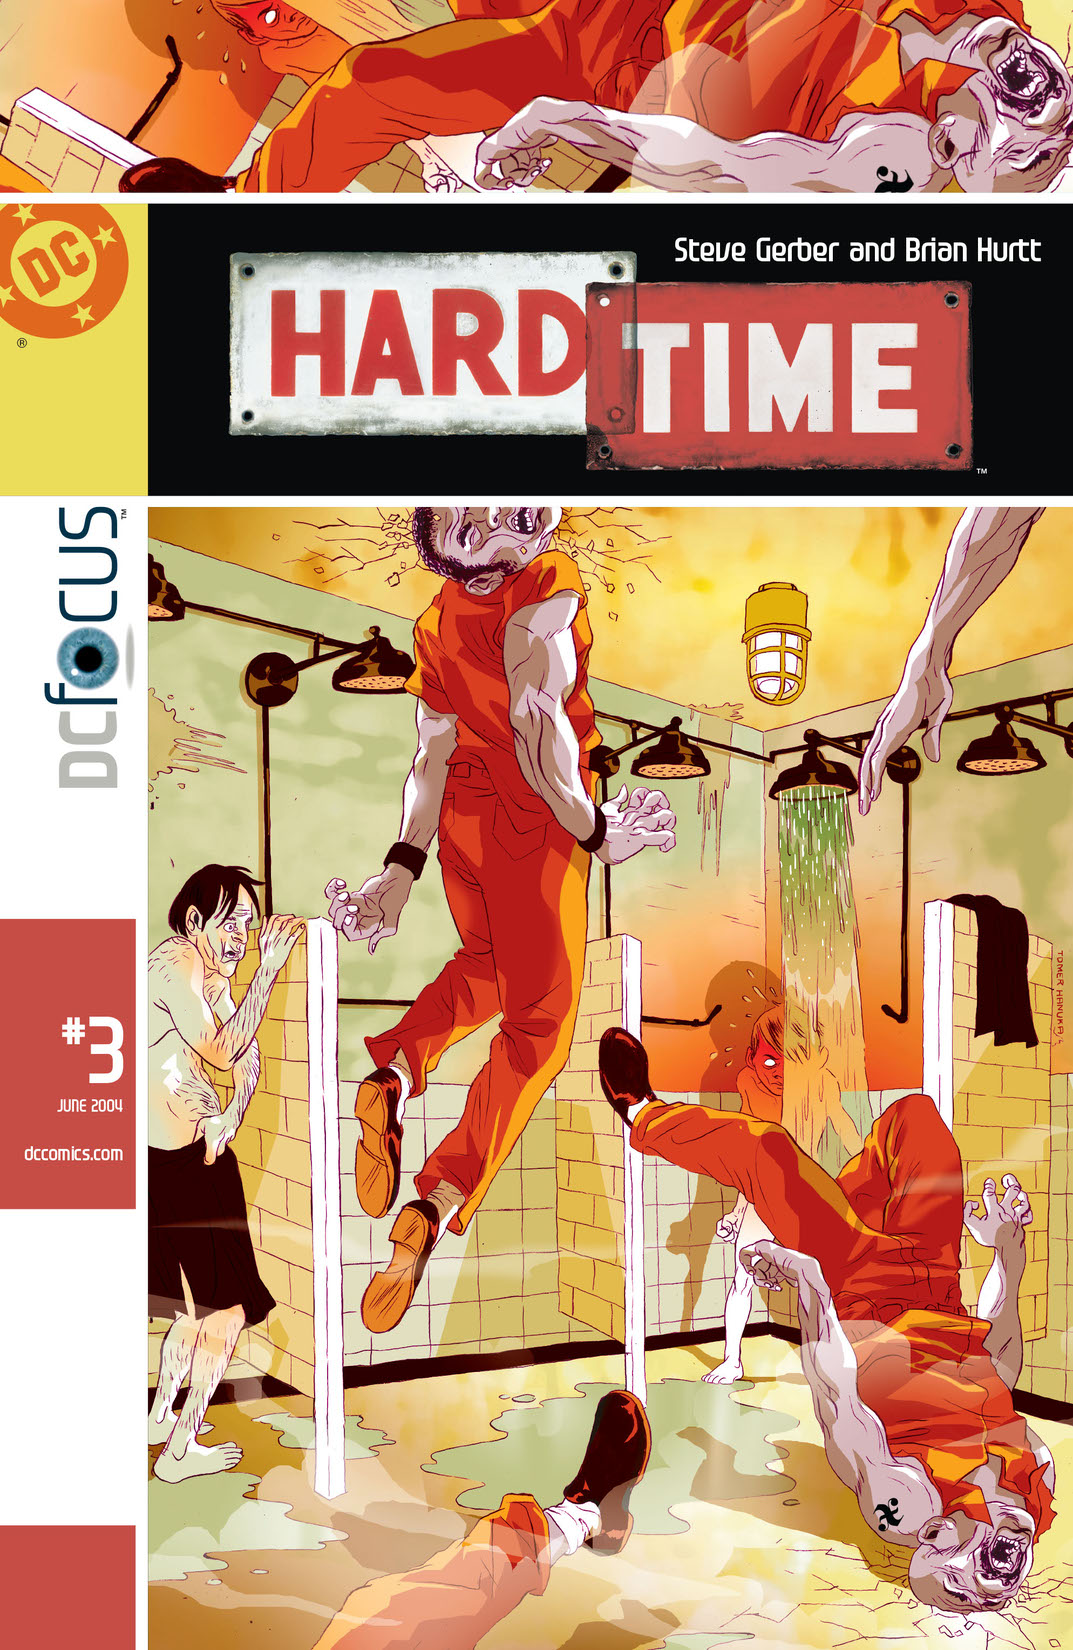 Hard Time #3 preview images